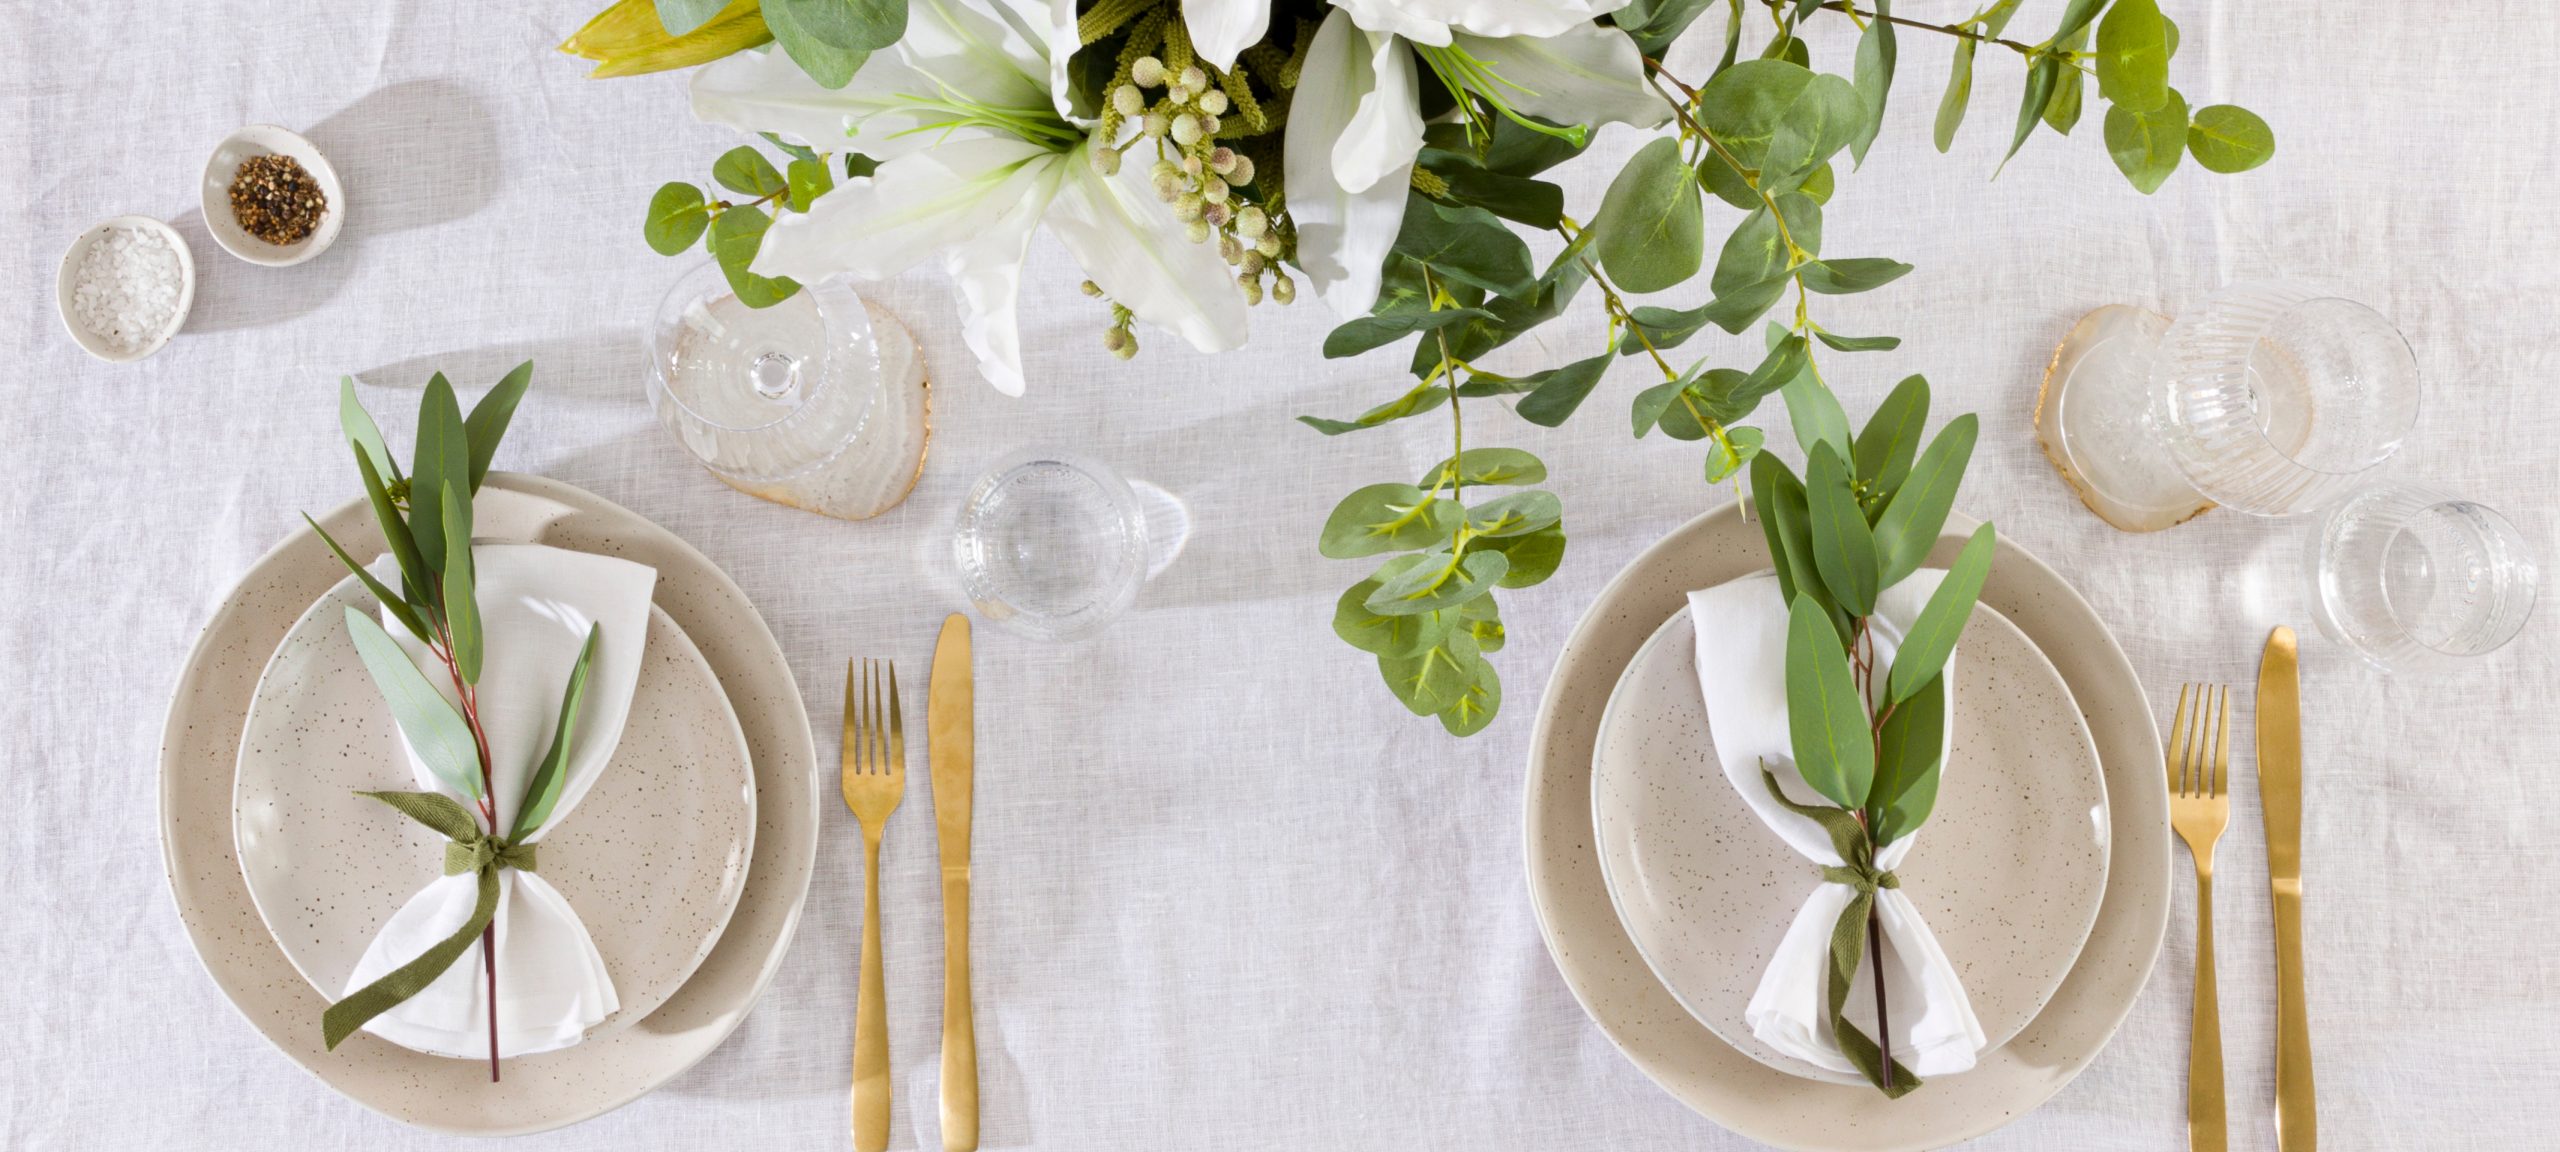 Pillow Talk dining table styling with stems and plants 